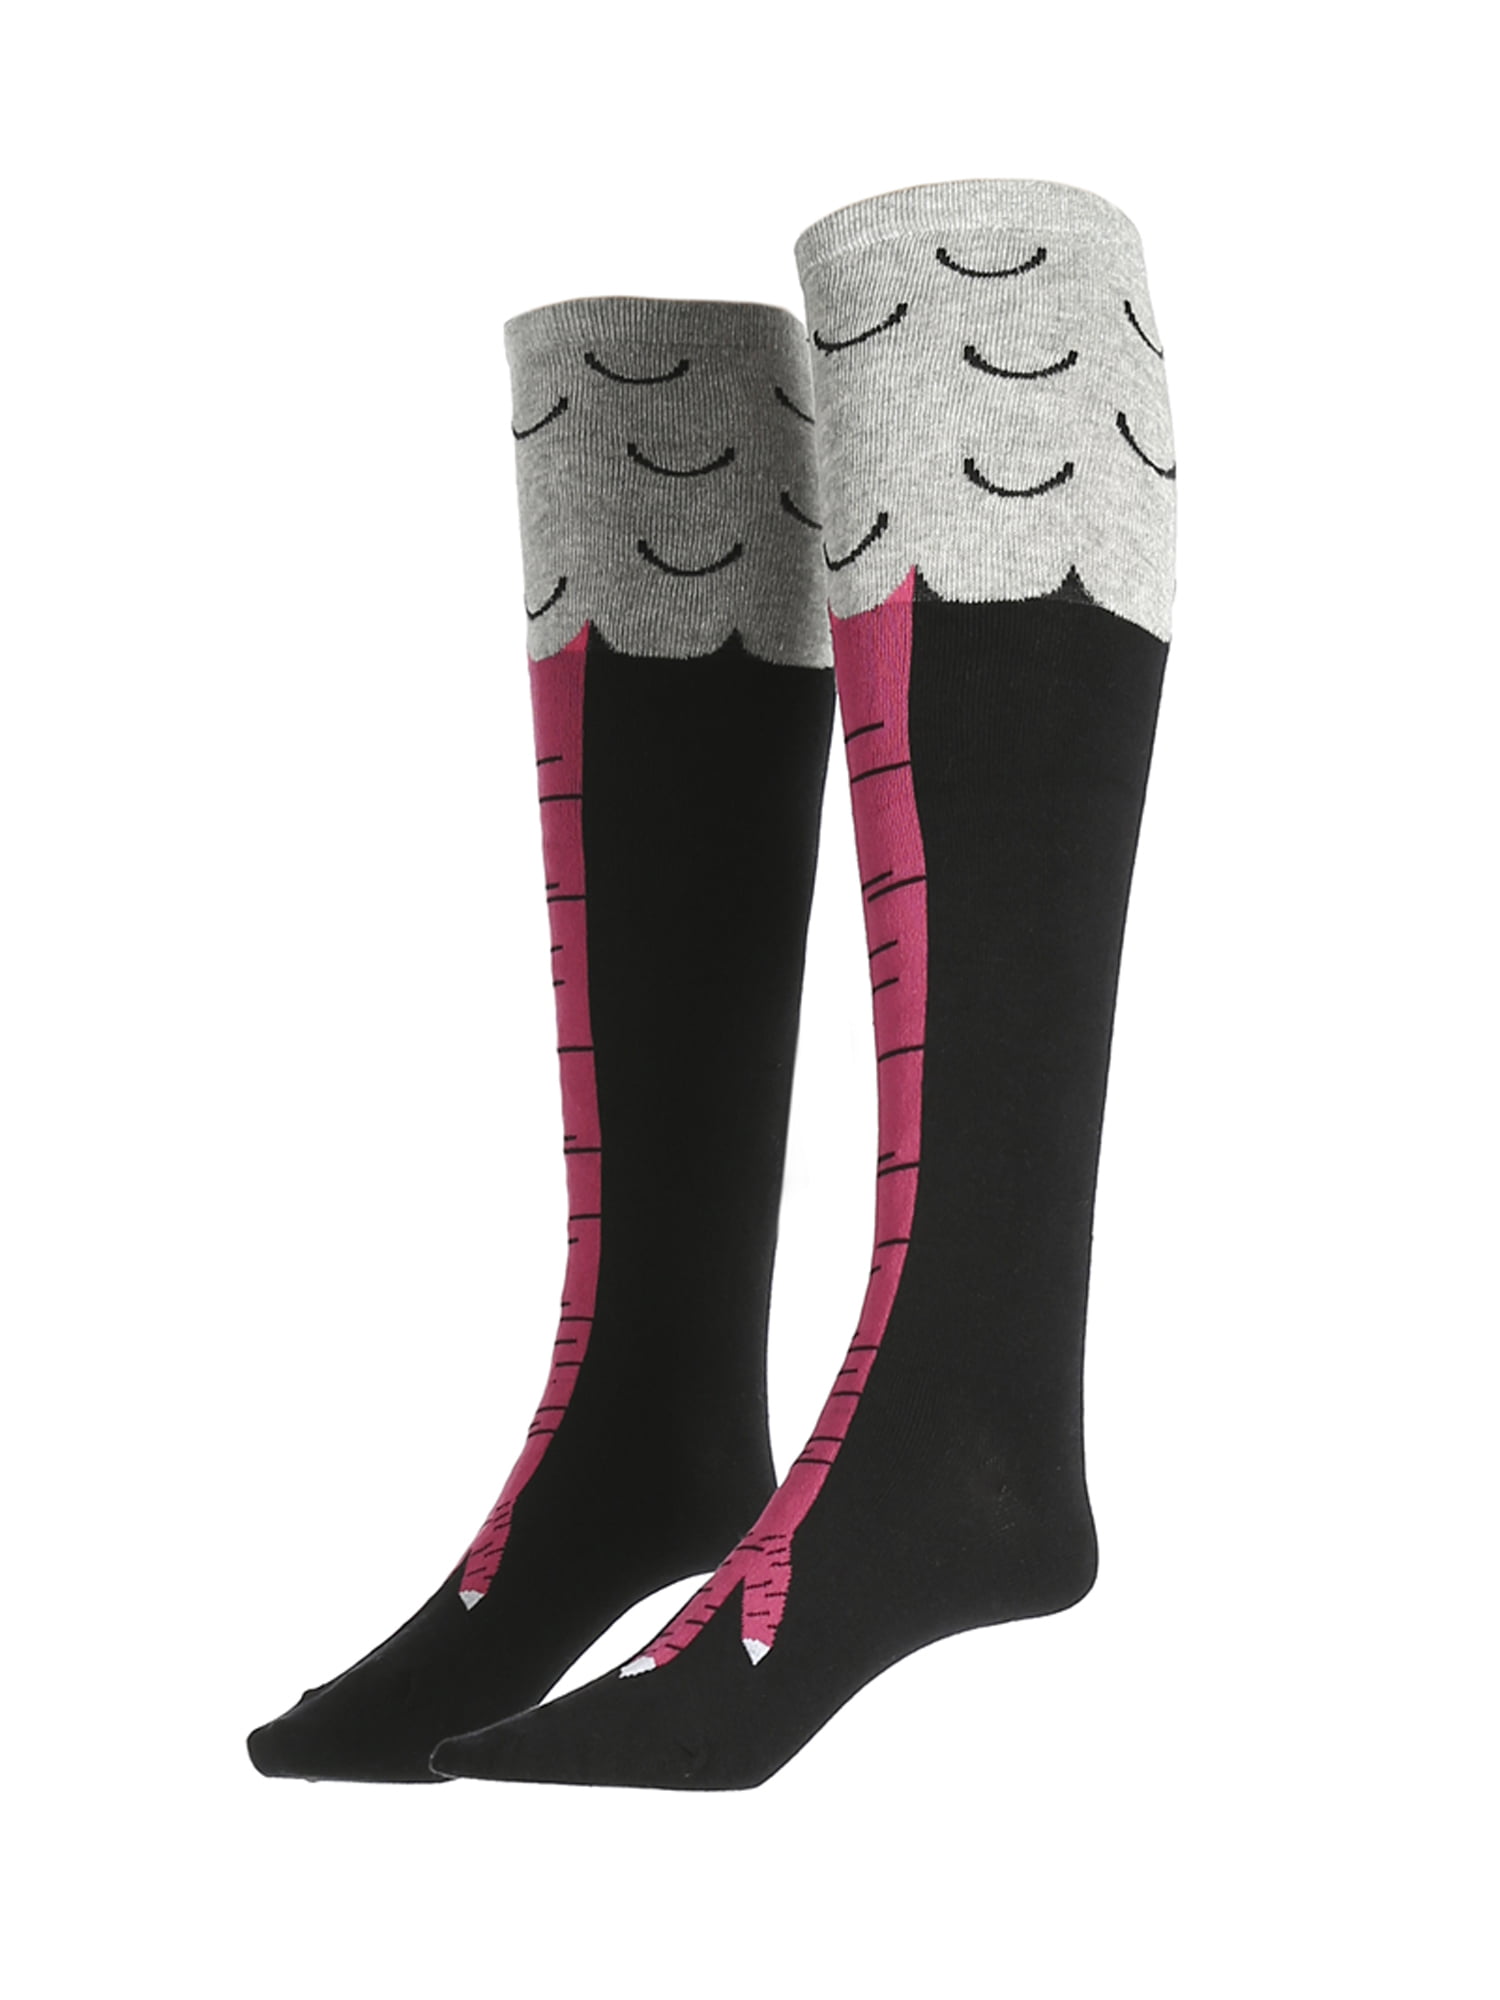 Details about   Among Us Unisex Socks Casual Printed Winter Knee Highs Novelty Socks B-day Gifts